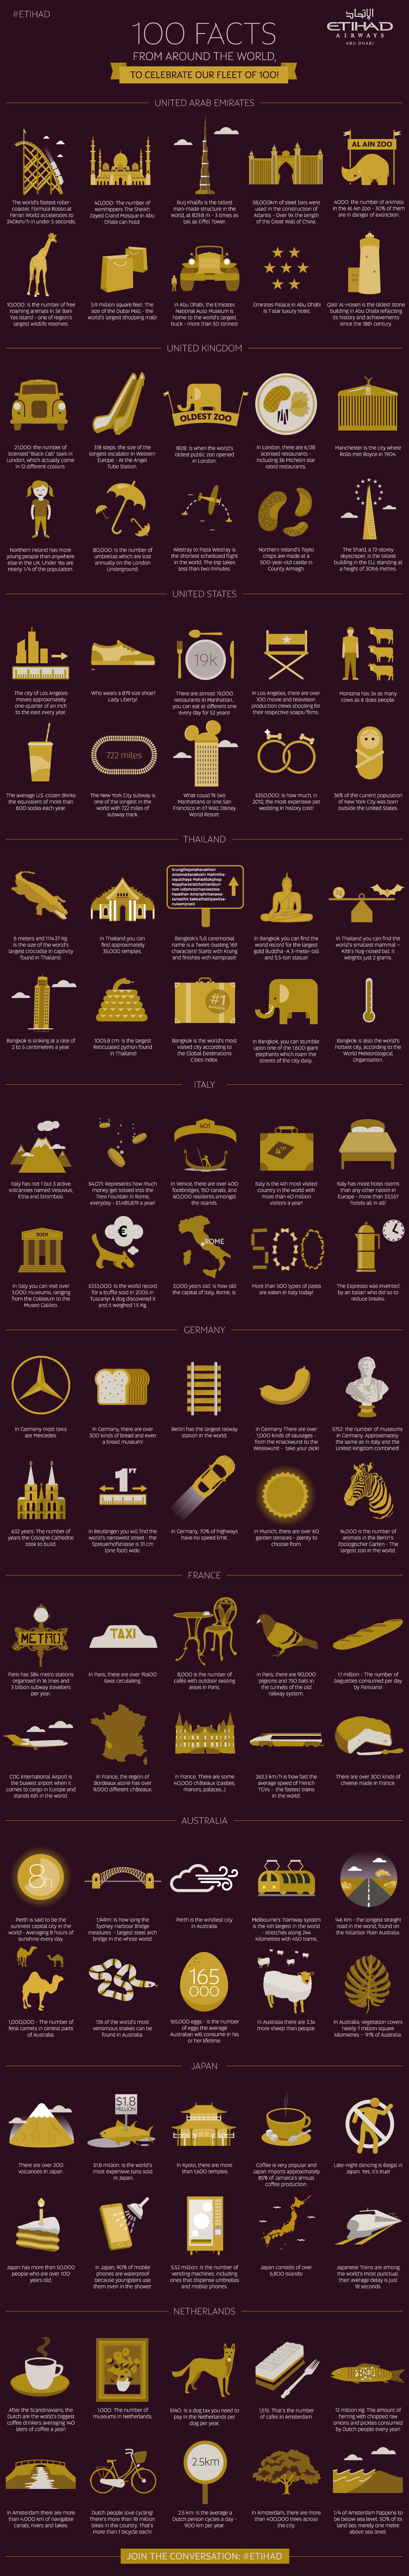 Infographic: 100 Facts From Around The World - Sri Sutra Travel